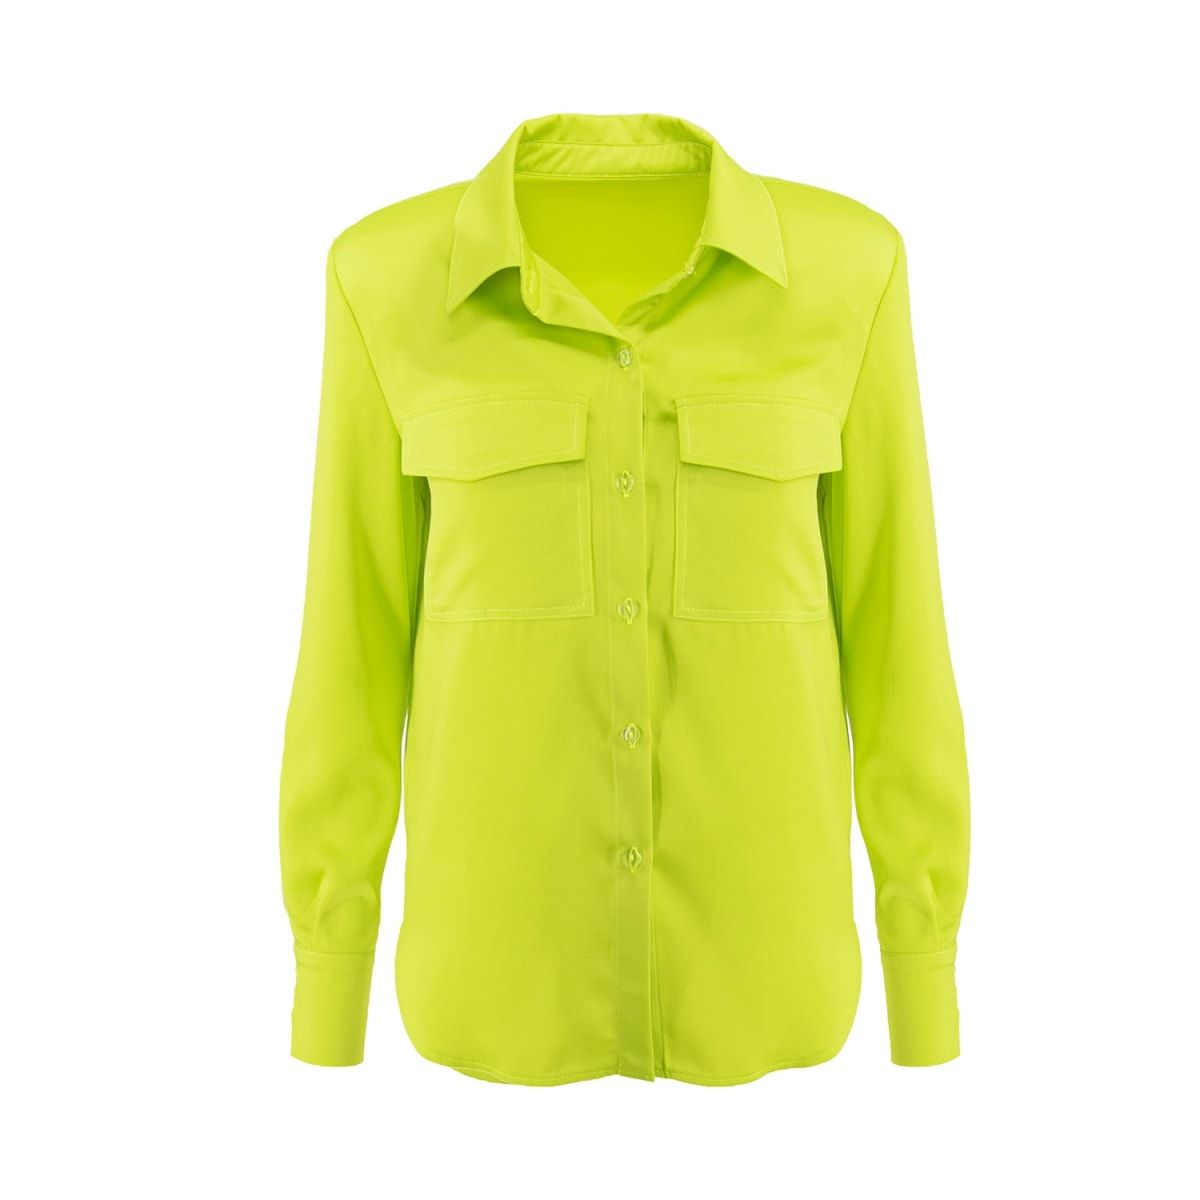 Neon Yellow Shirt With Oversized Shoulders | Wolf & Badger (US)